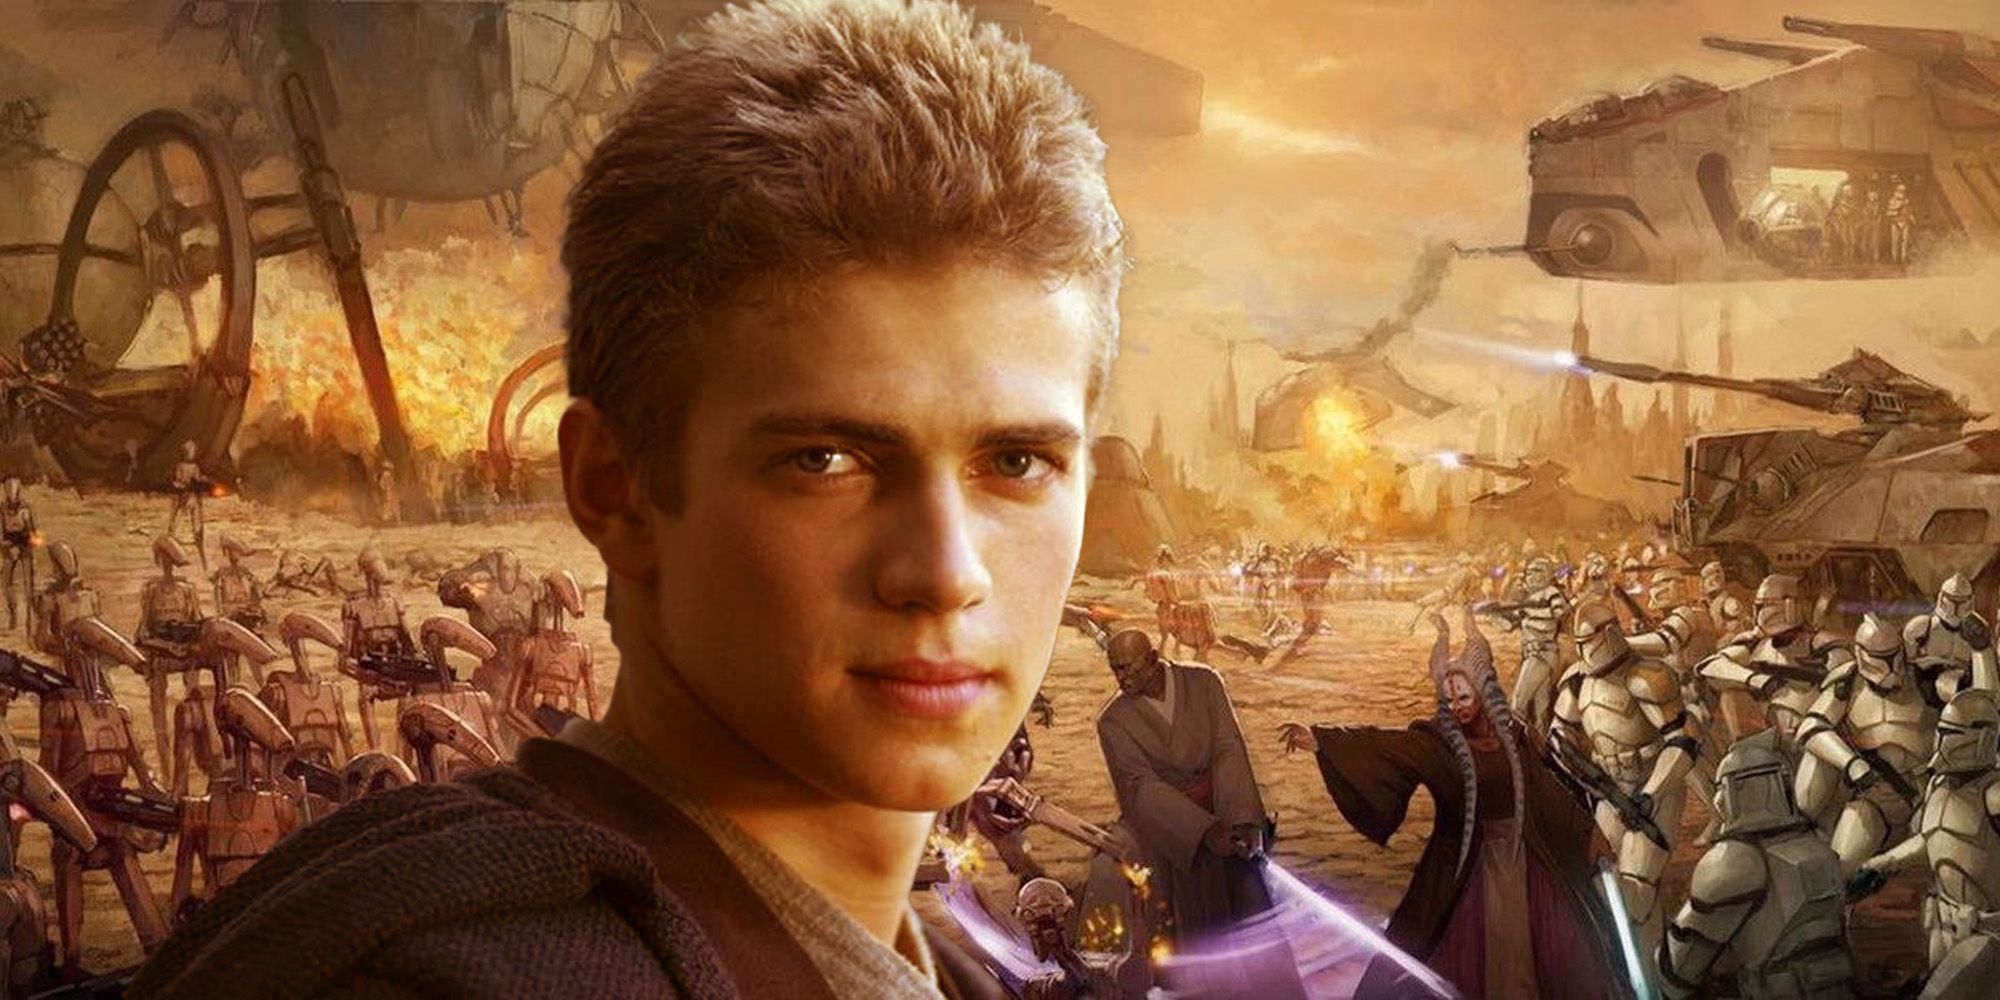 Anakin Star Wars attack of the clones Battle of geonosis